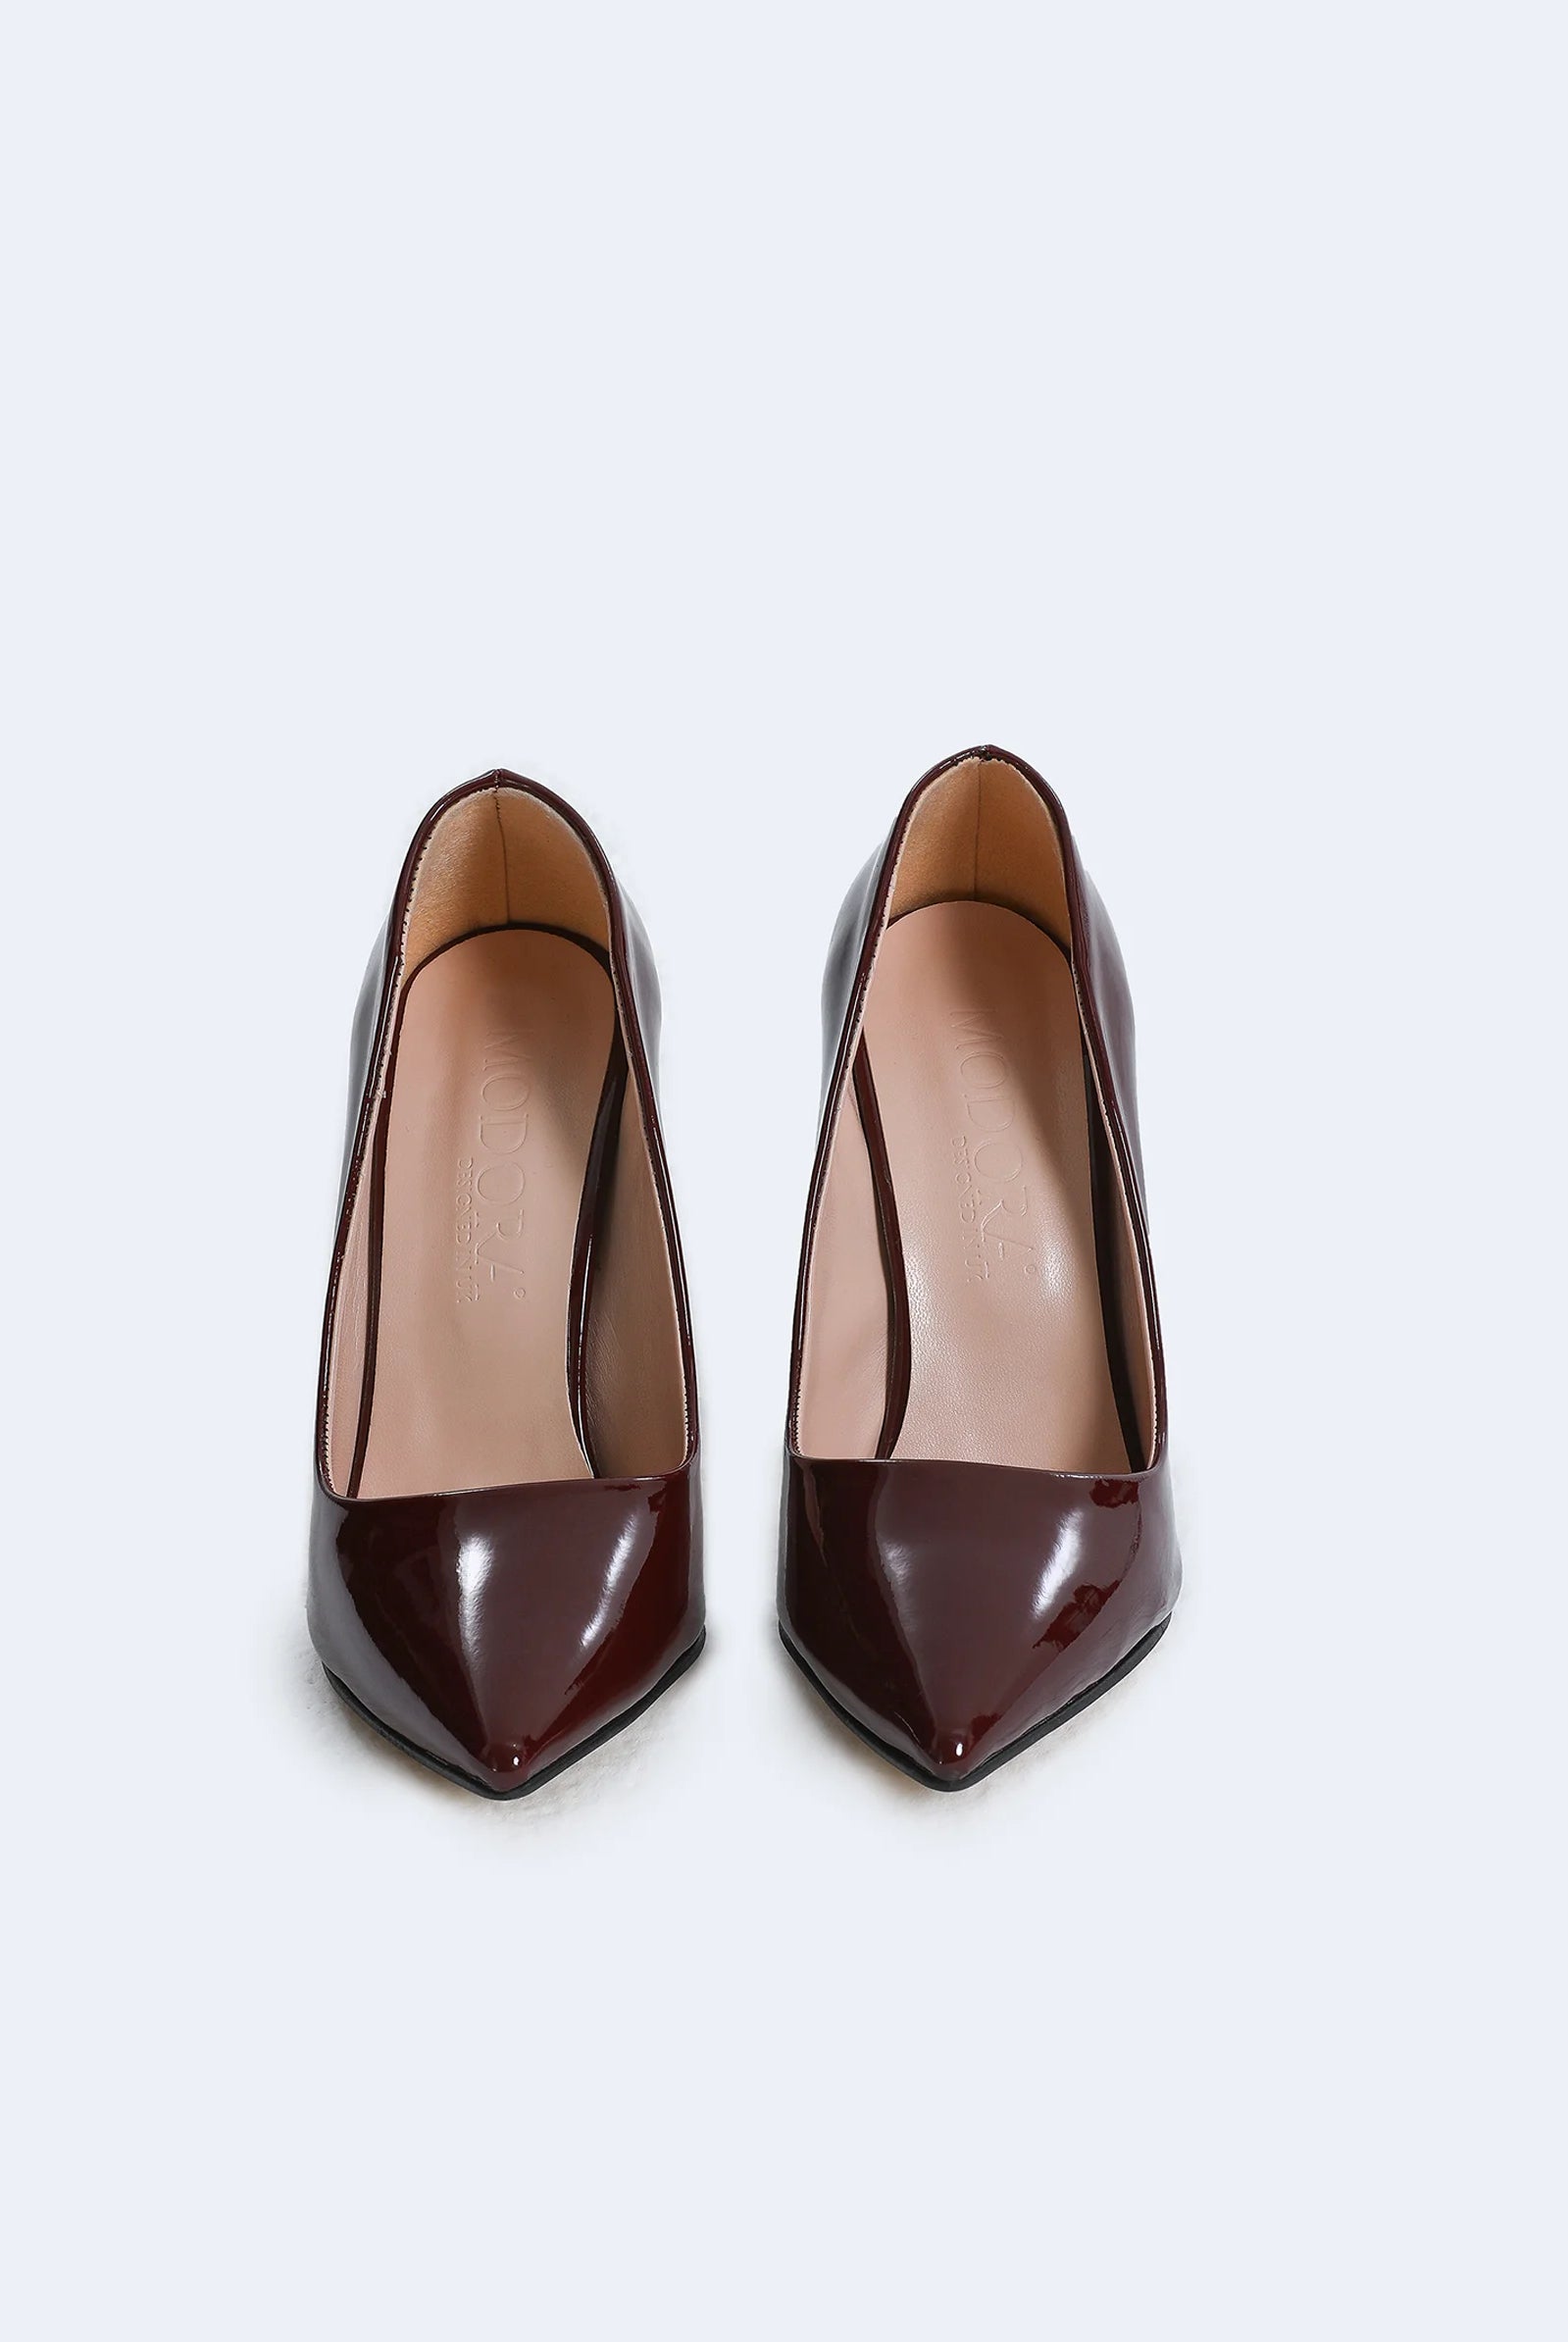 burgundy court shoes